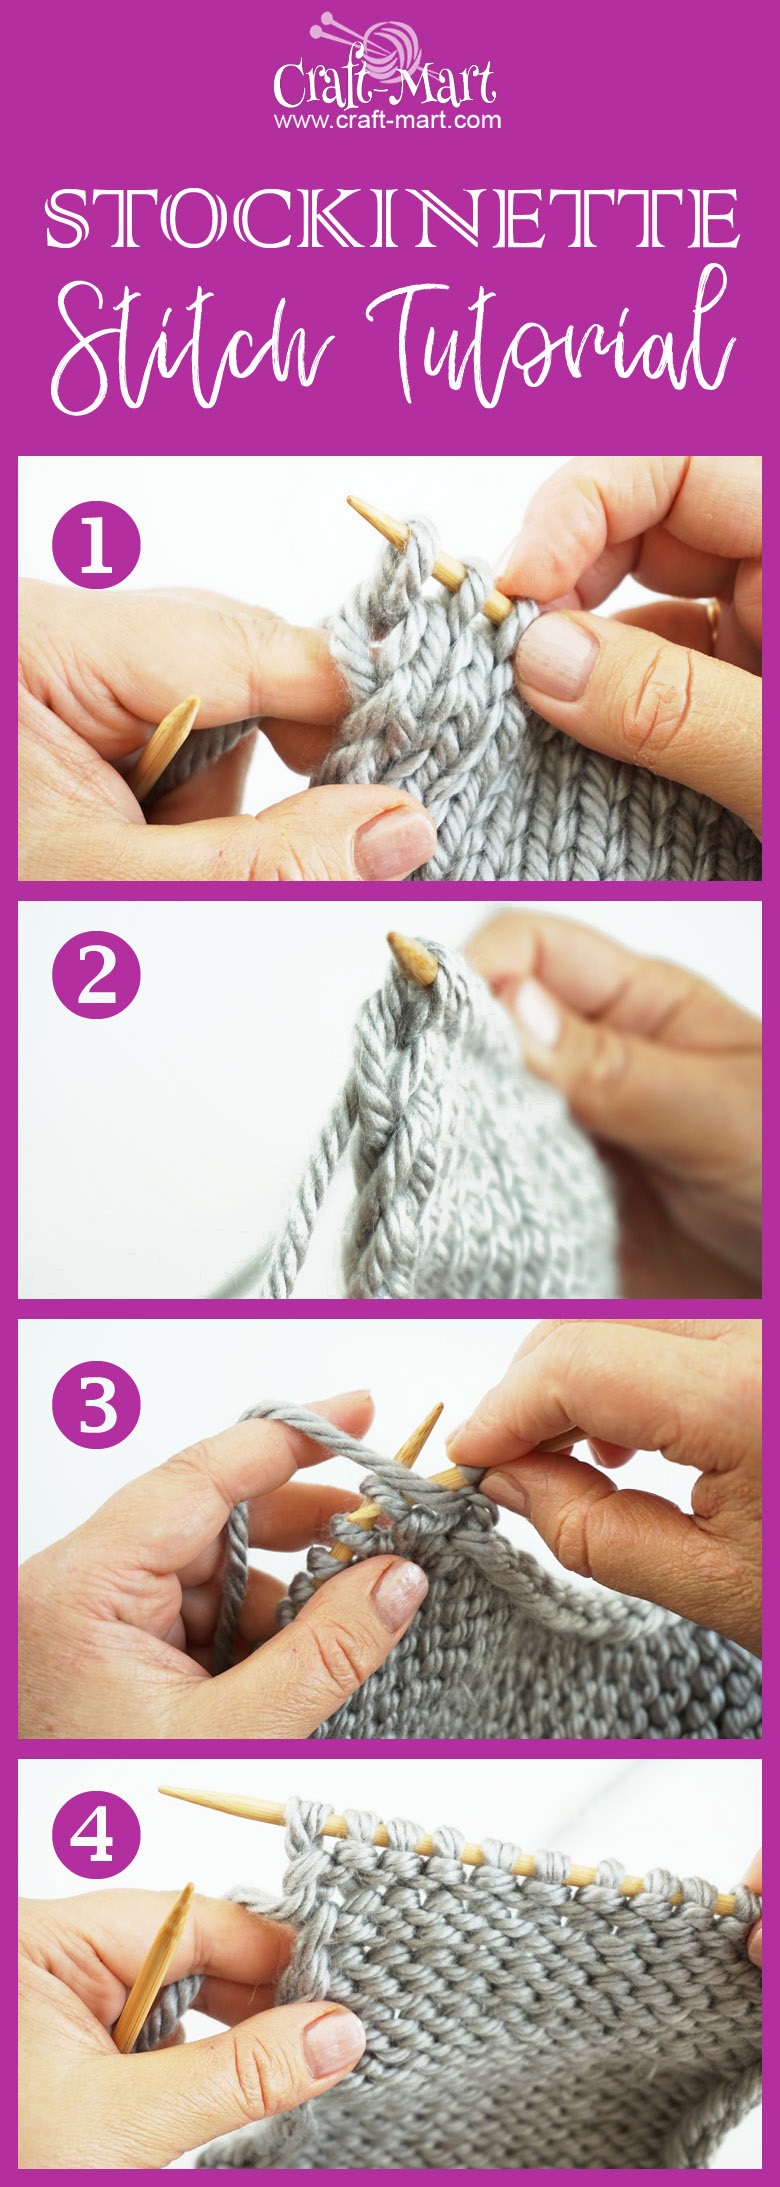 step-by-step tutorial for stockinette stitch